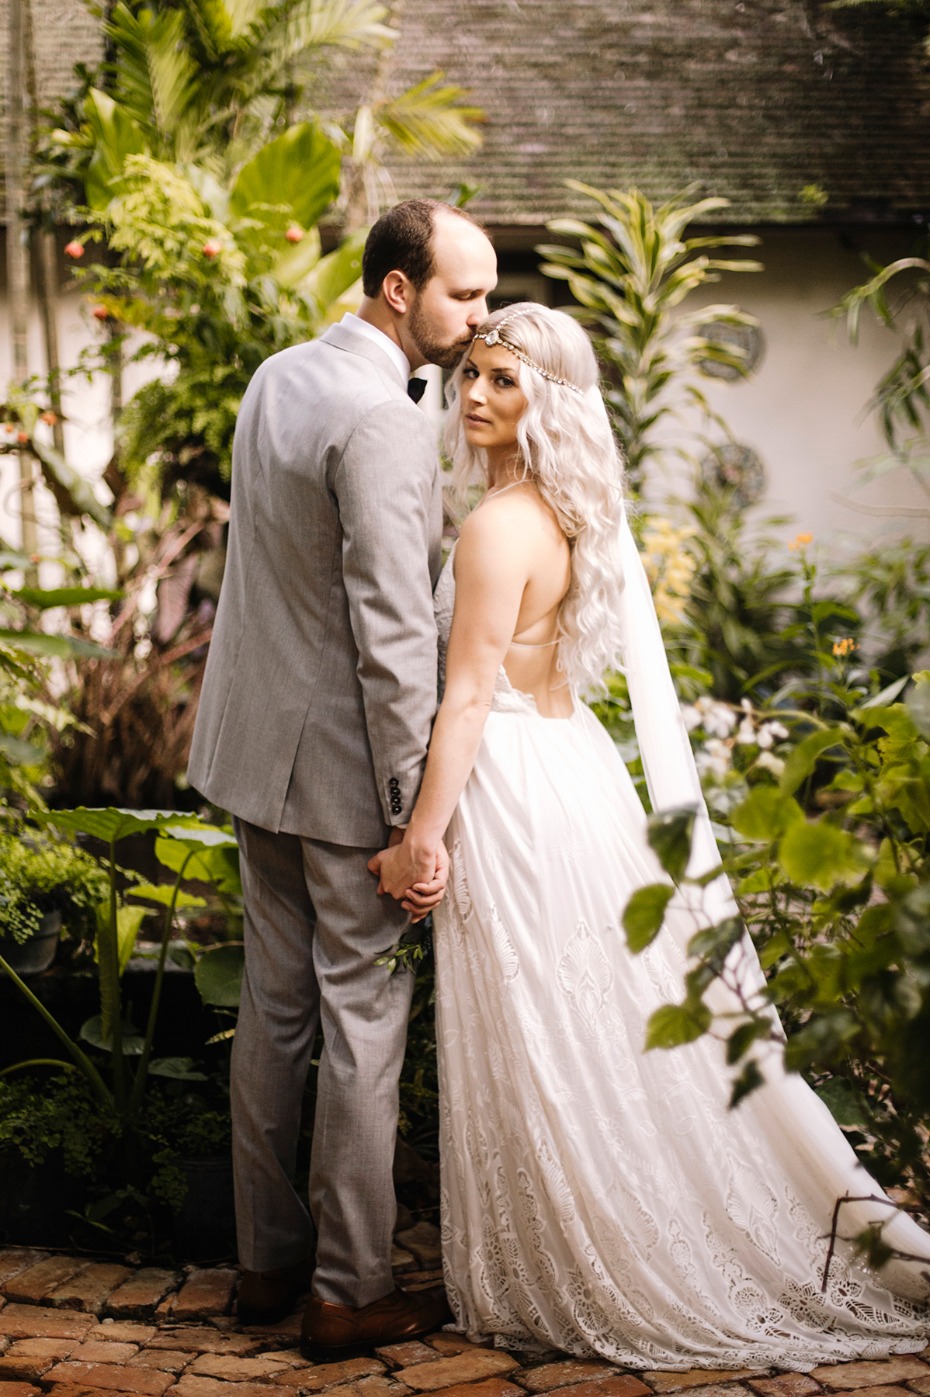 we seriously want to steal this brides amazing style